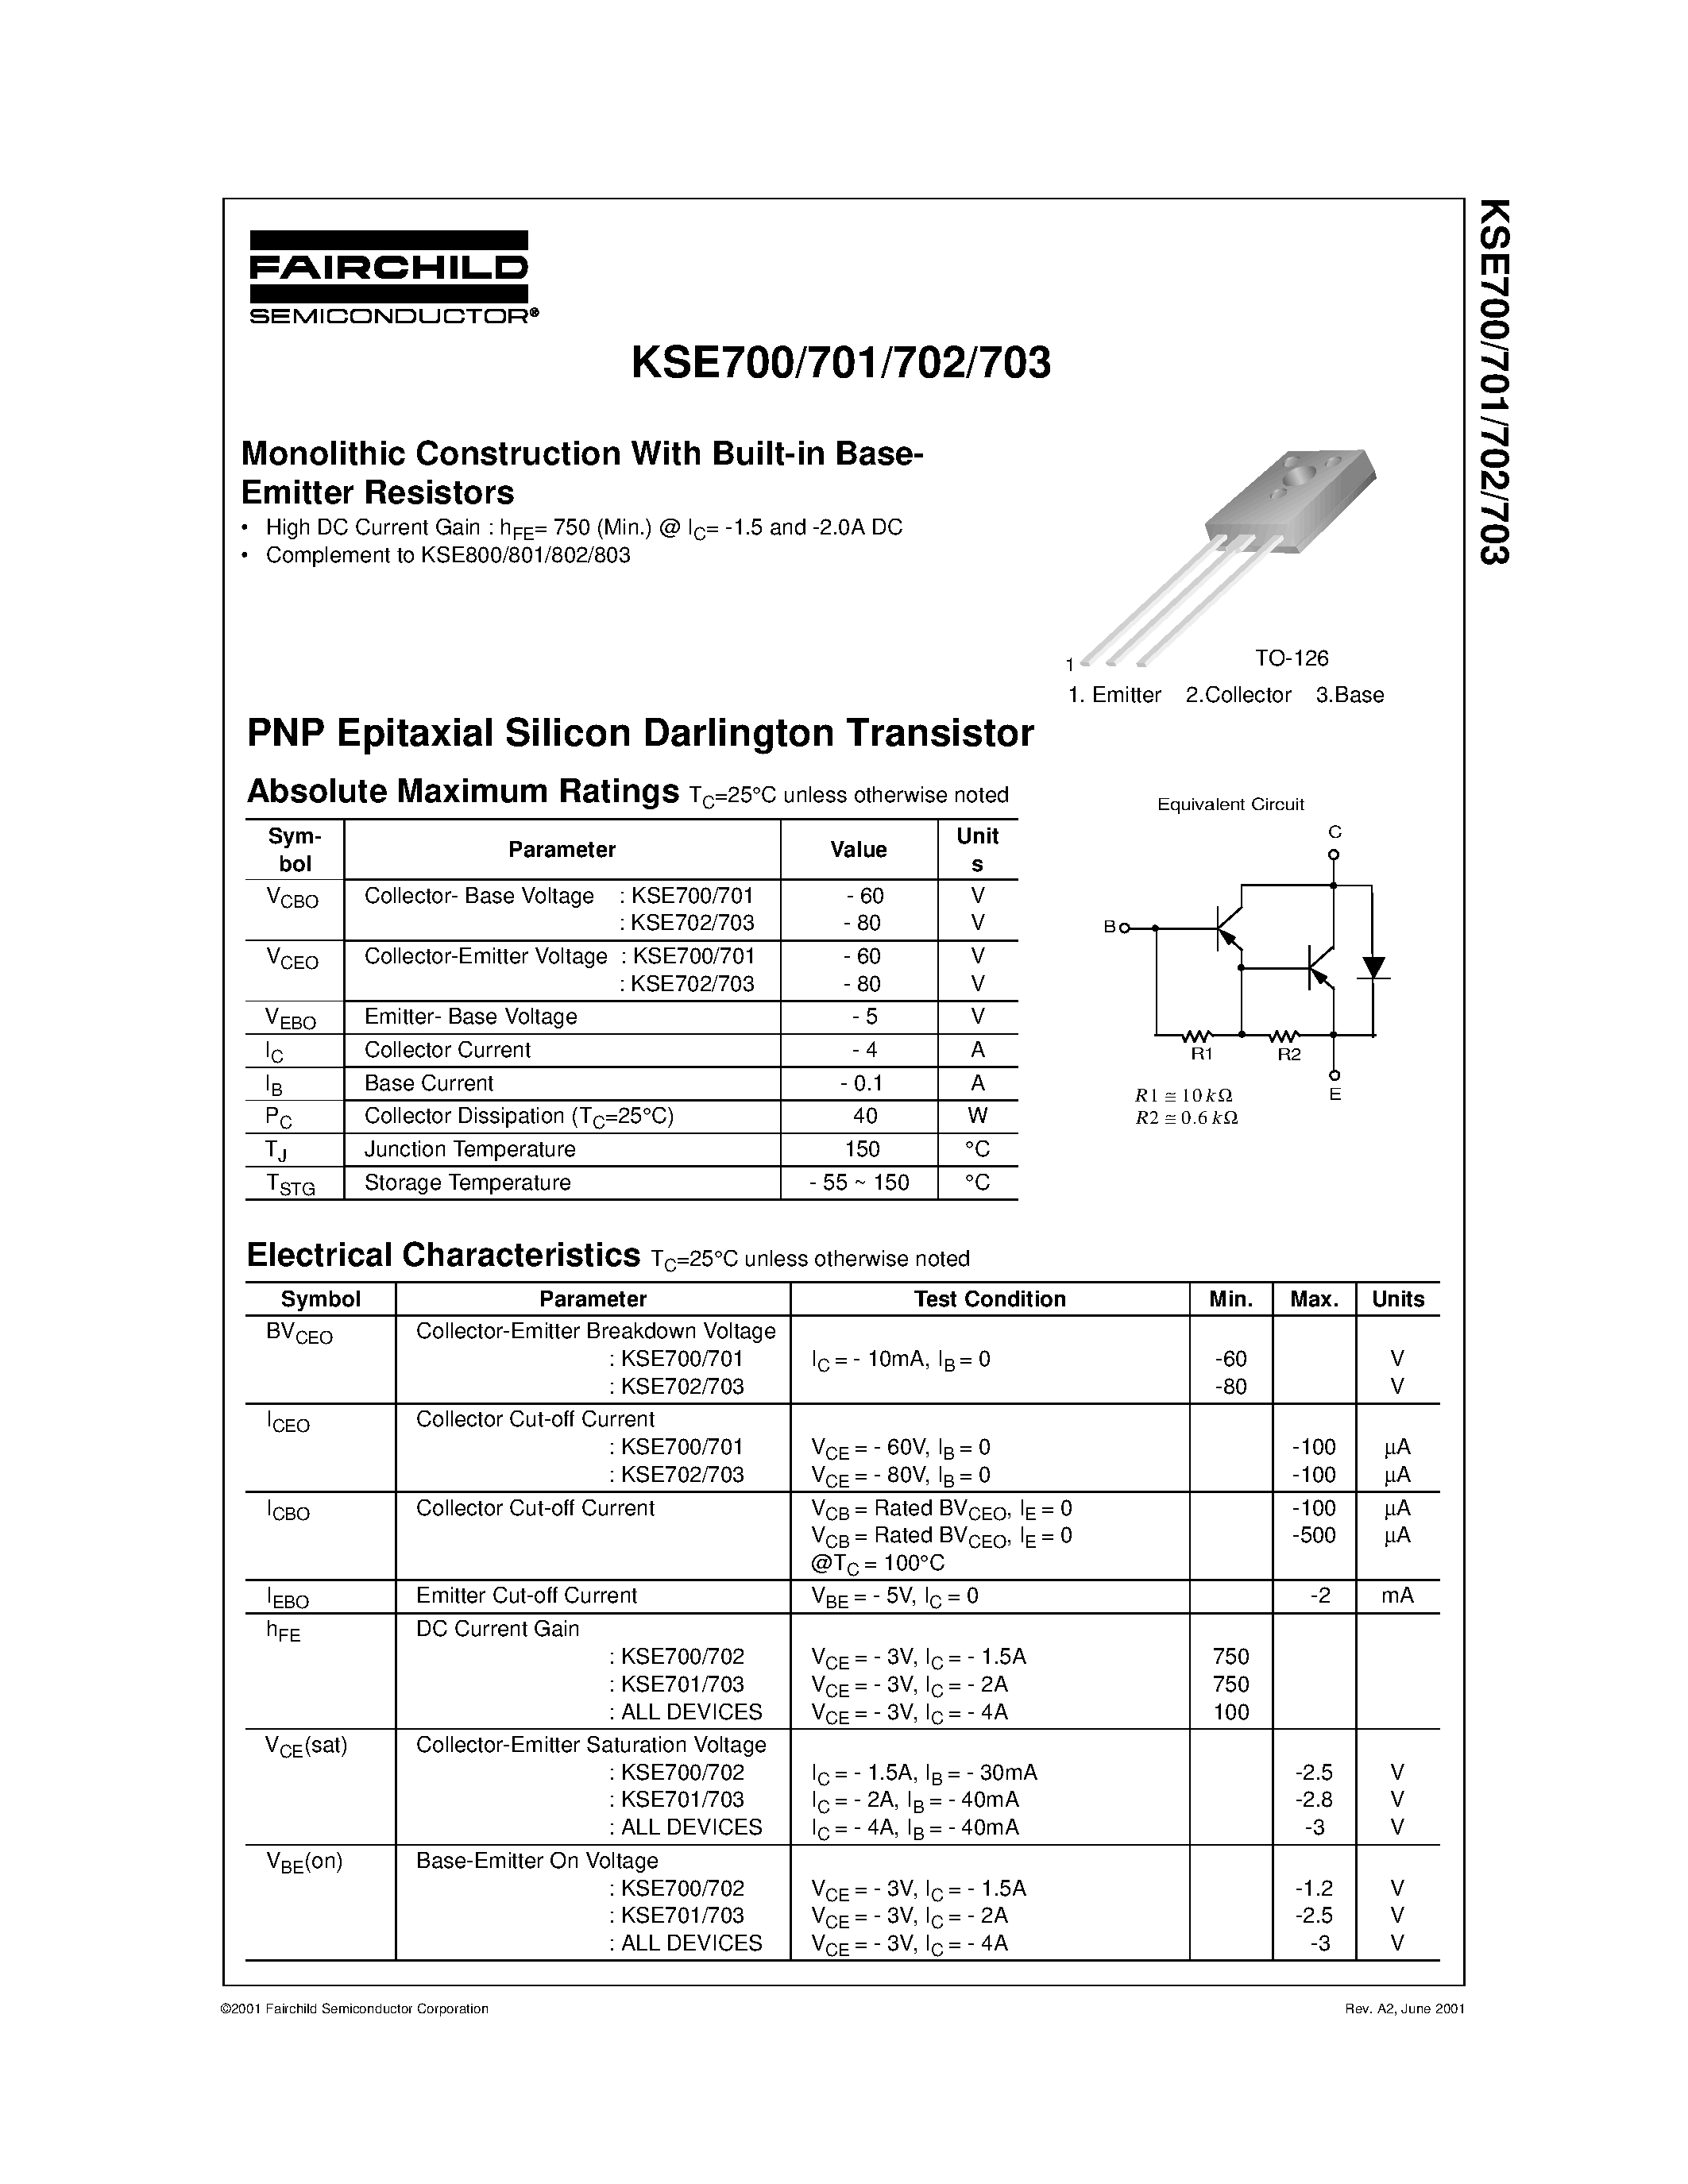 Datasheet KSE700 - Monolithic Construction With Built-in Base- Emitter Resistors page 1